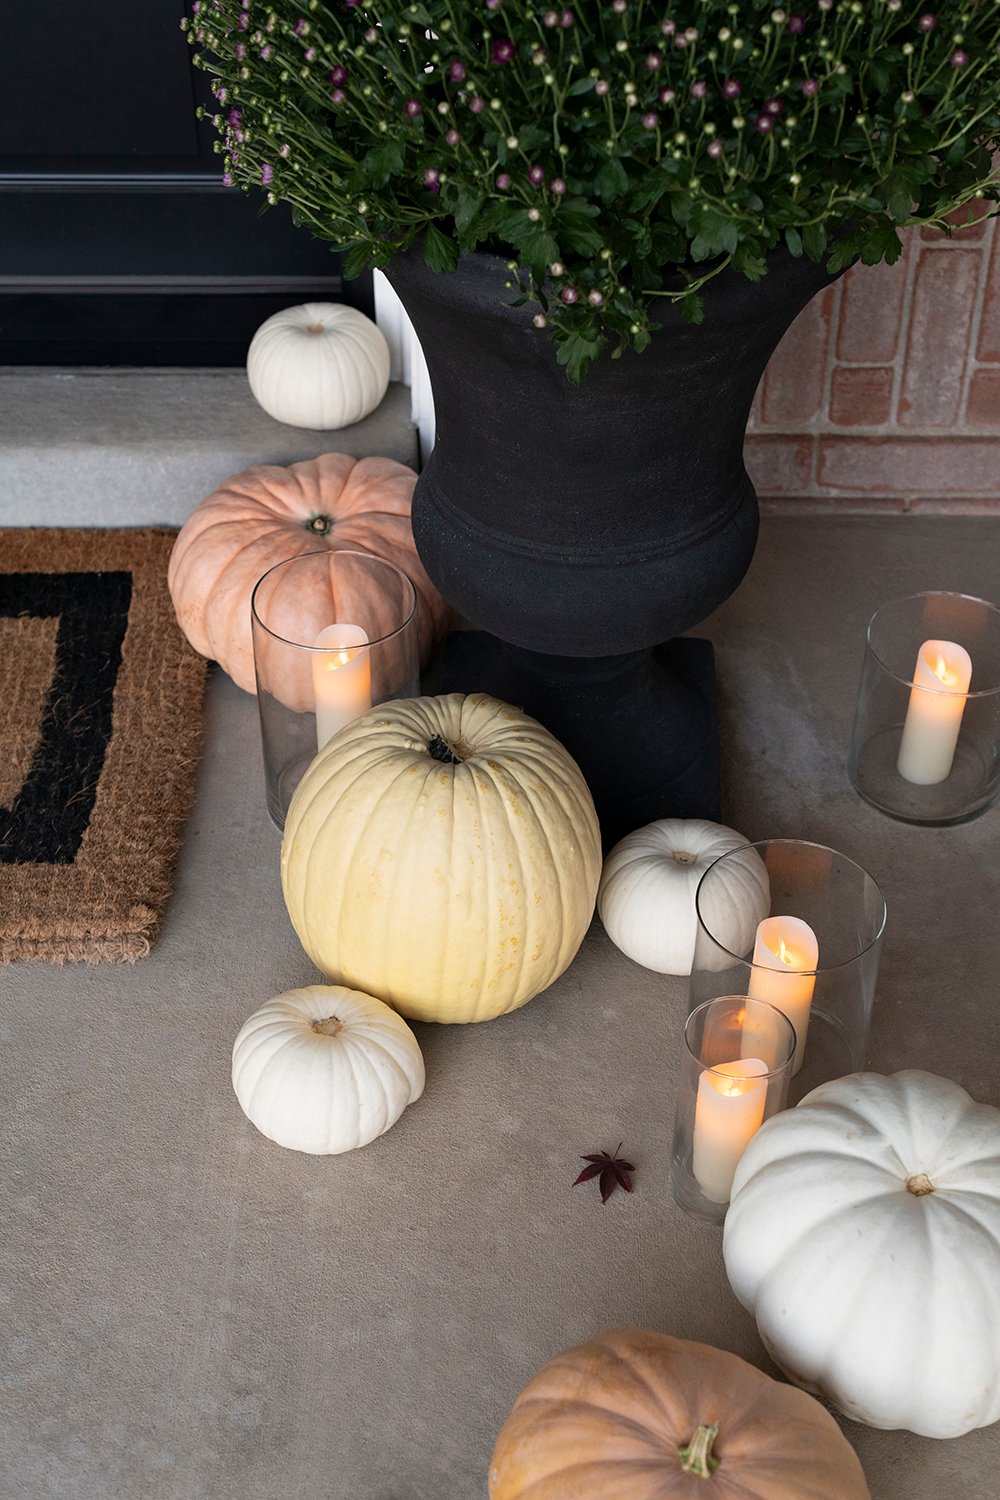 Autumn & Halloween Vignettes at Home - roomfortuesday.com